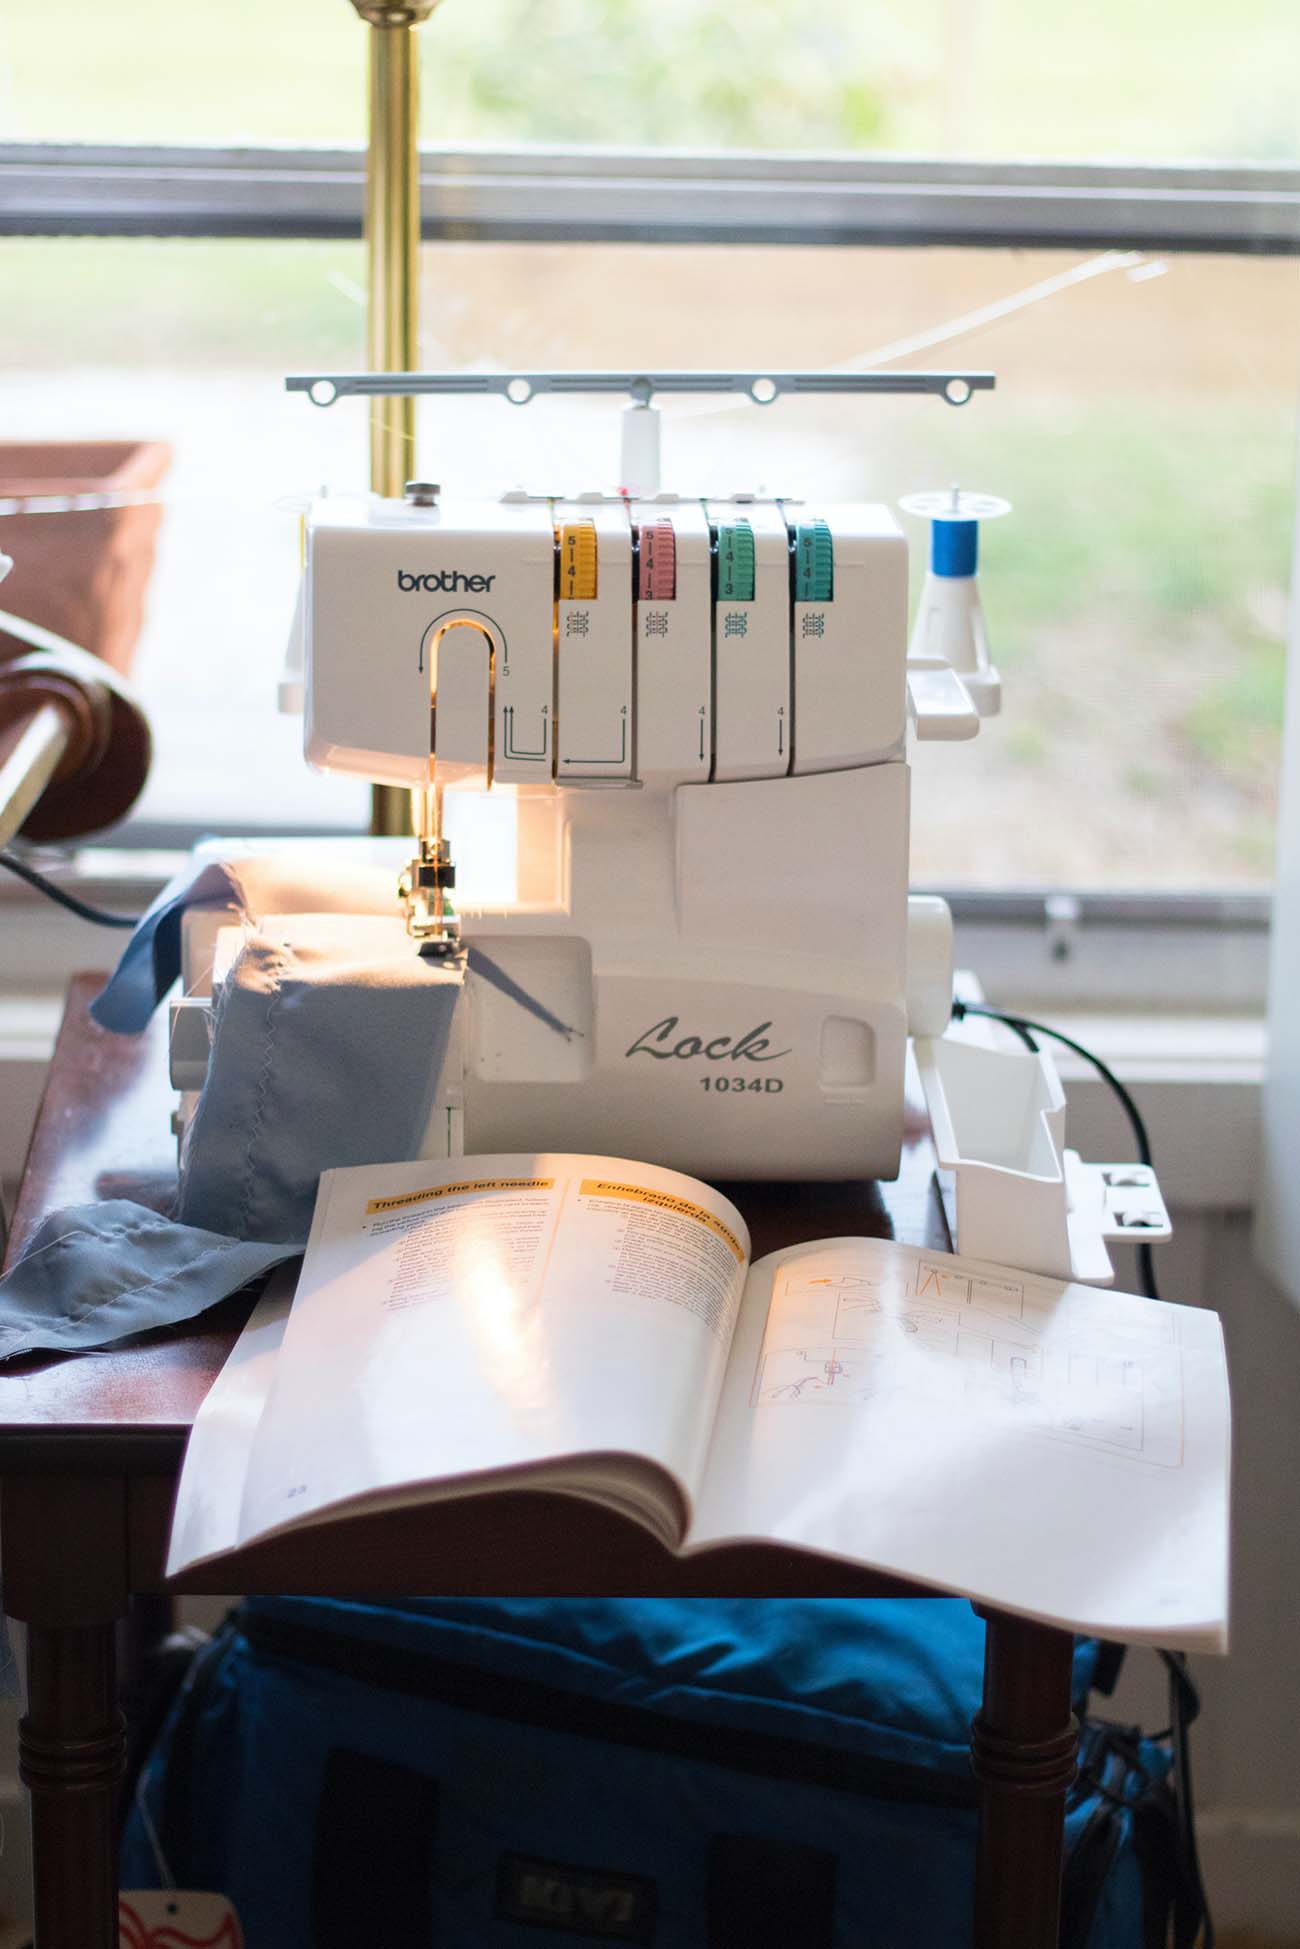 Serger vs. Sewing Machine: Which is Better for Garments?